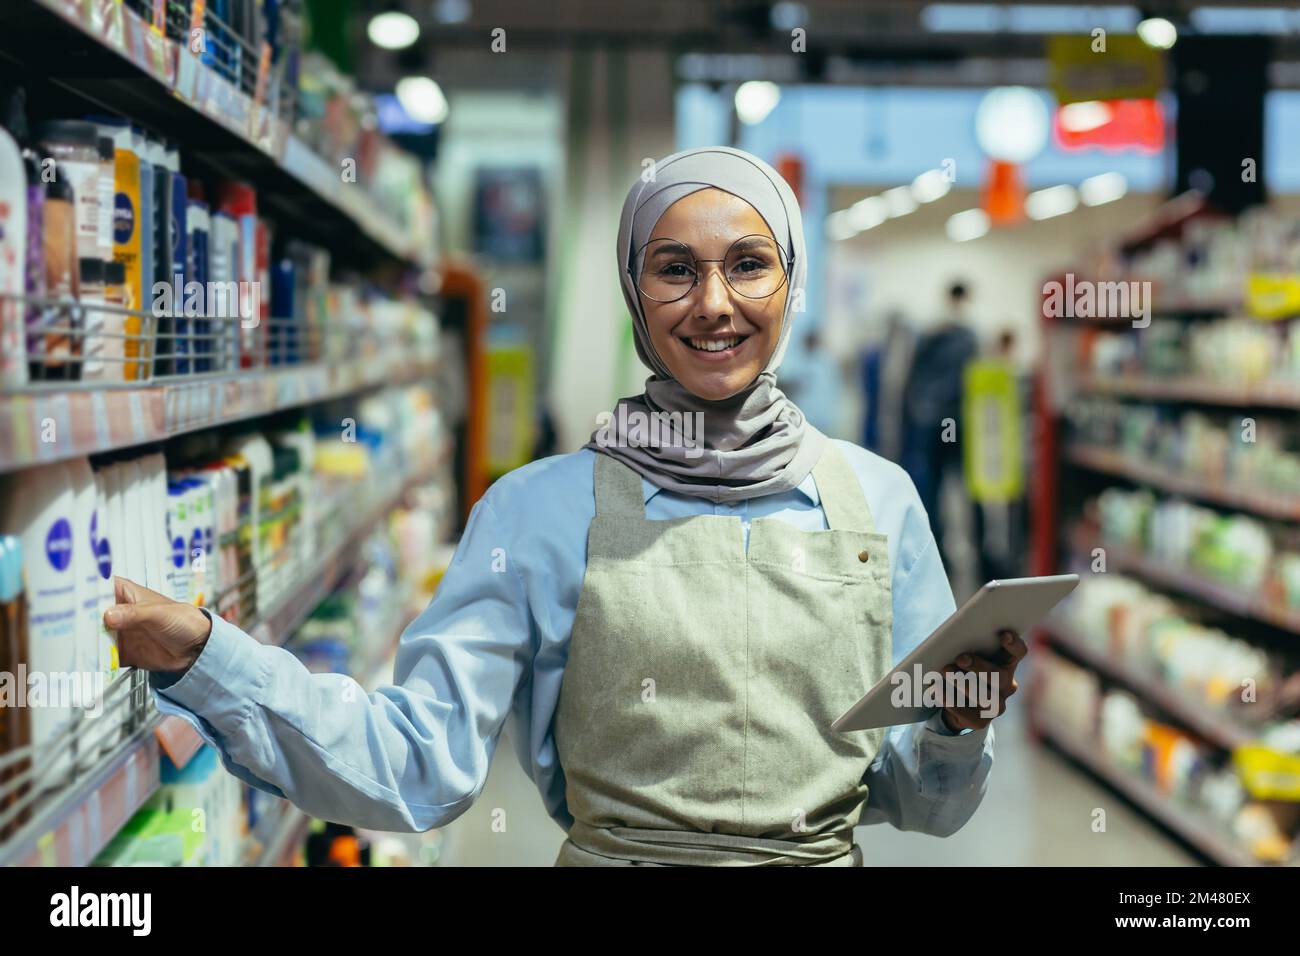 Portrait of a female saleswoman in a hijab, a salesperson in a household chemicals department is smiling and looking at the camera, holding a laptop tablet computer in her hands. Stock Photo